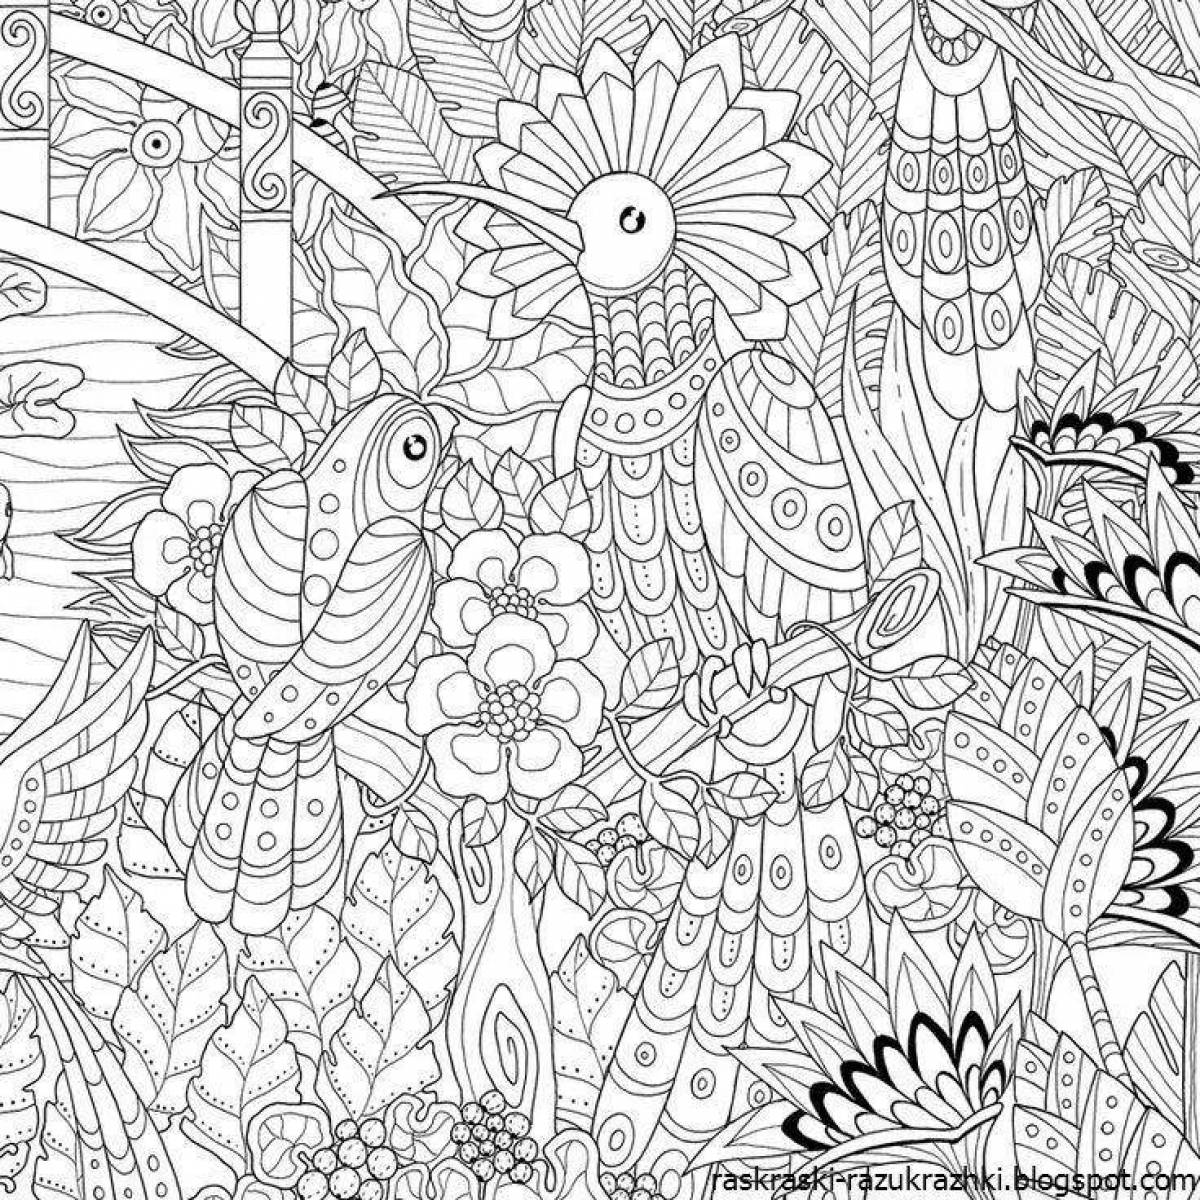 Fine coloring pages for adults